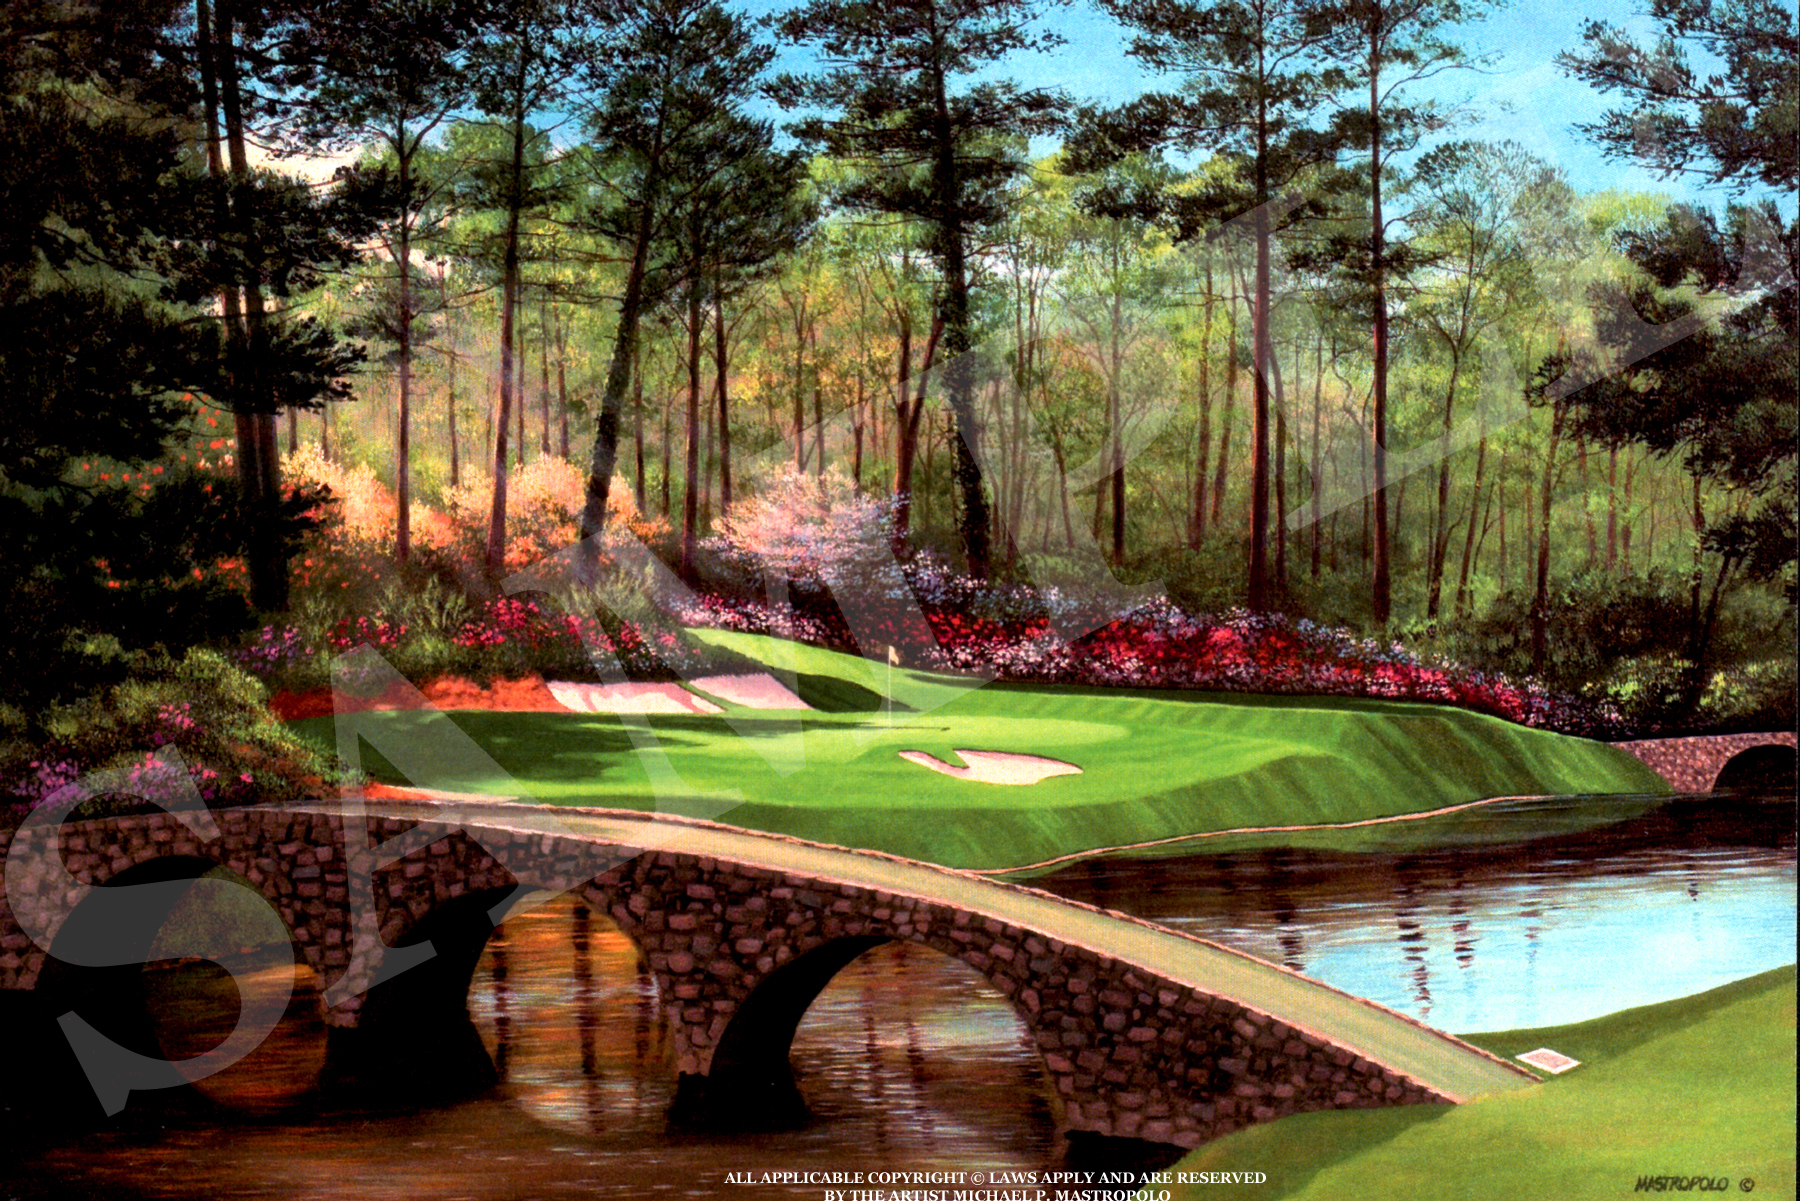 Free download augusta national golf club th hole us courses x for your desktop mobile tablet explore augusta golf wallpaper background golf backgrounds augusta national wallpaper golf desktop wallpaper augusta